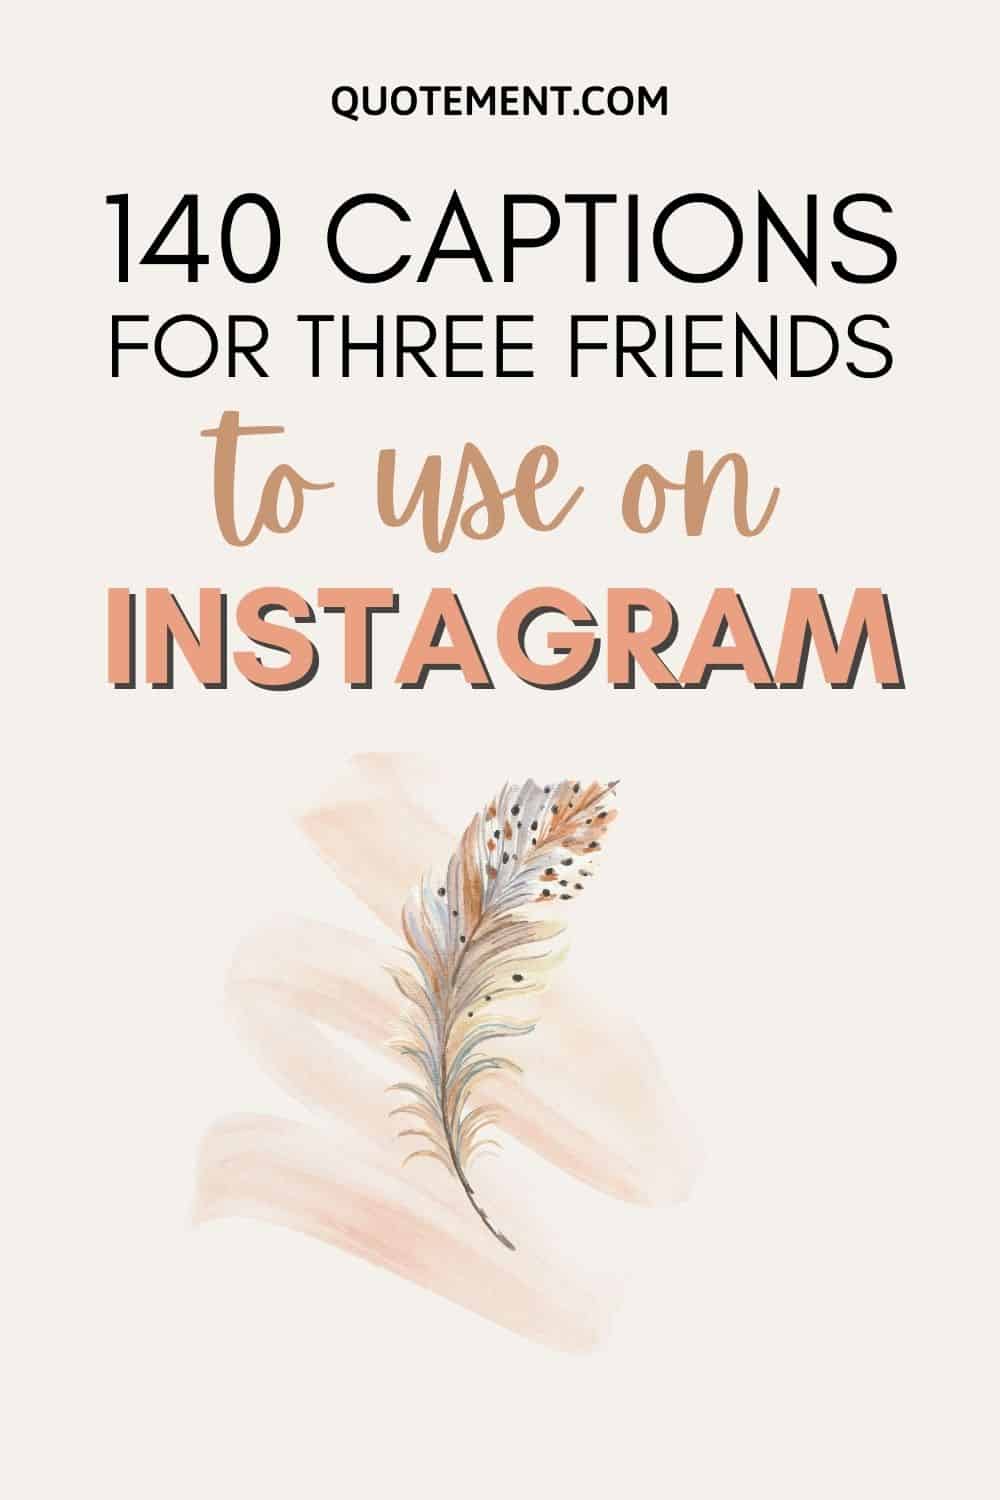 140 Captions For Three Friends To Use On Instagram